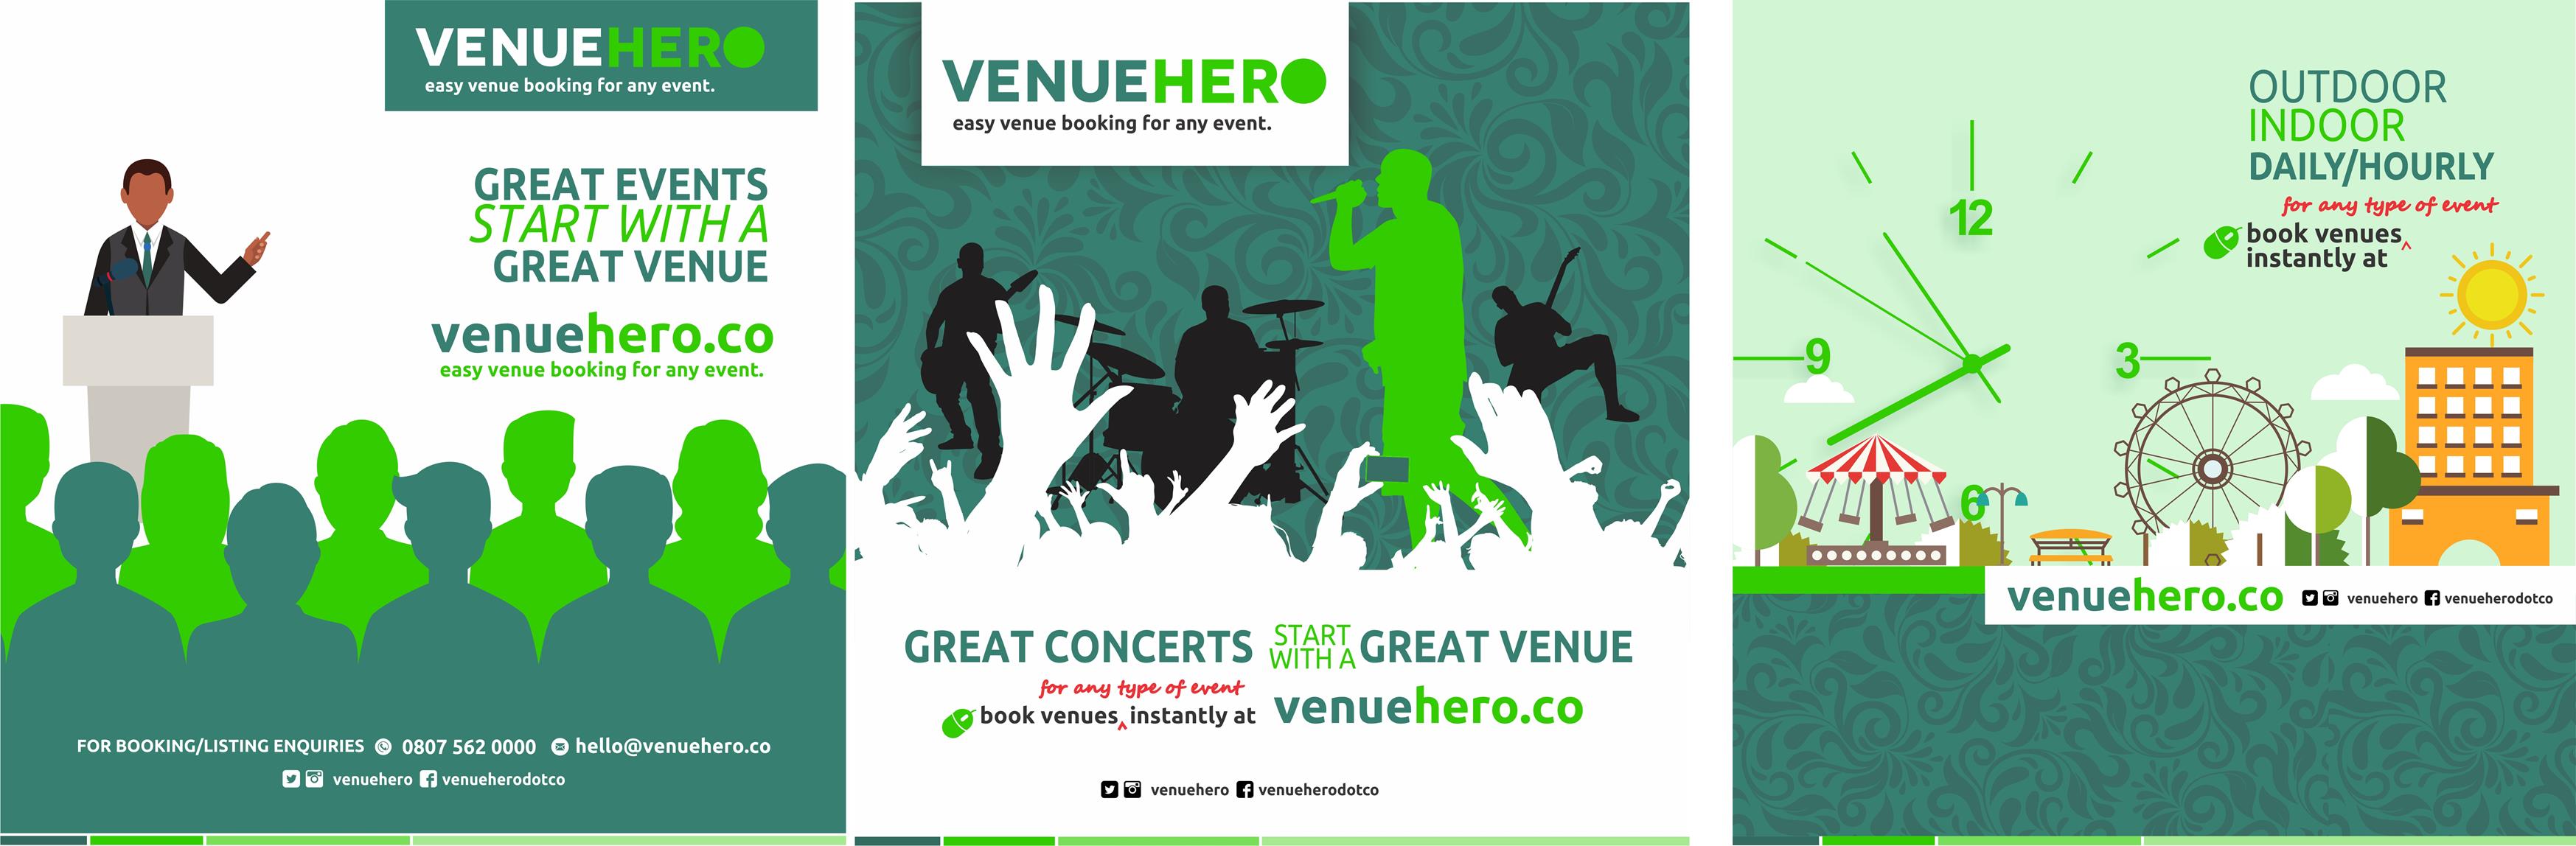 When Logistics of Finding a Venue becomes daunting, VenueHero makes it possible at the Click of a Button